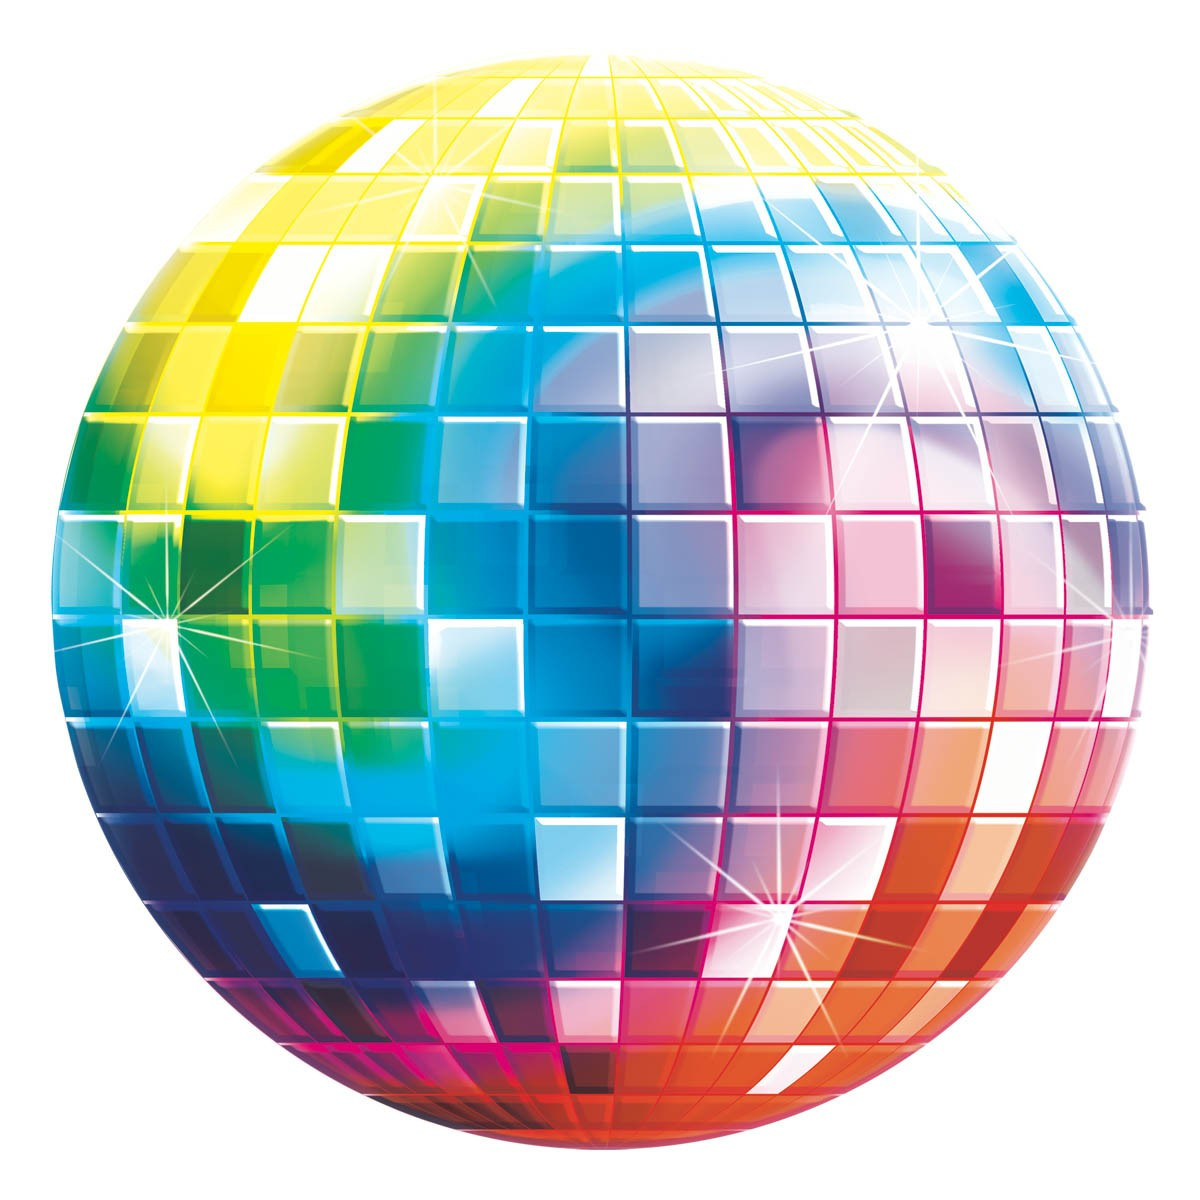 70'S Birthday Party Ideas
 DISCO BALL 70 S CARDBOARD CUTOUT PARTY ROOM WALL CEILING